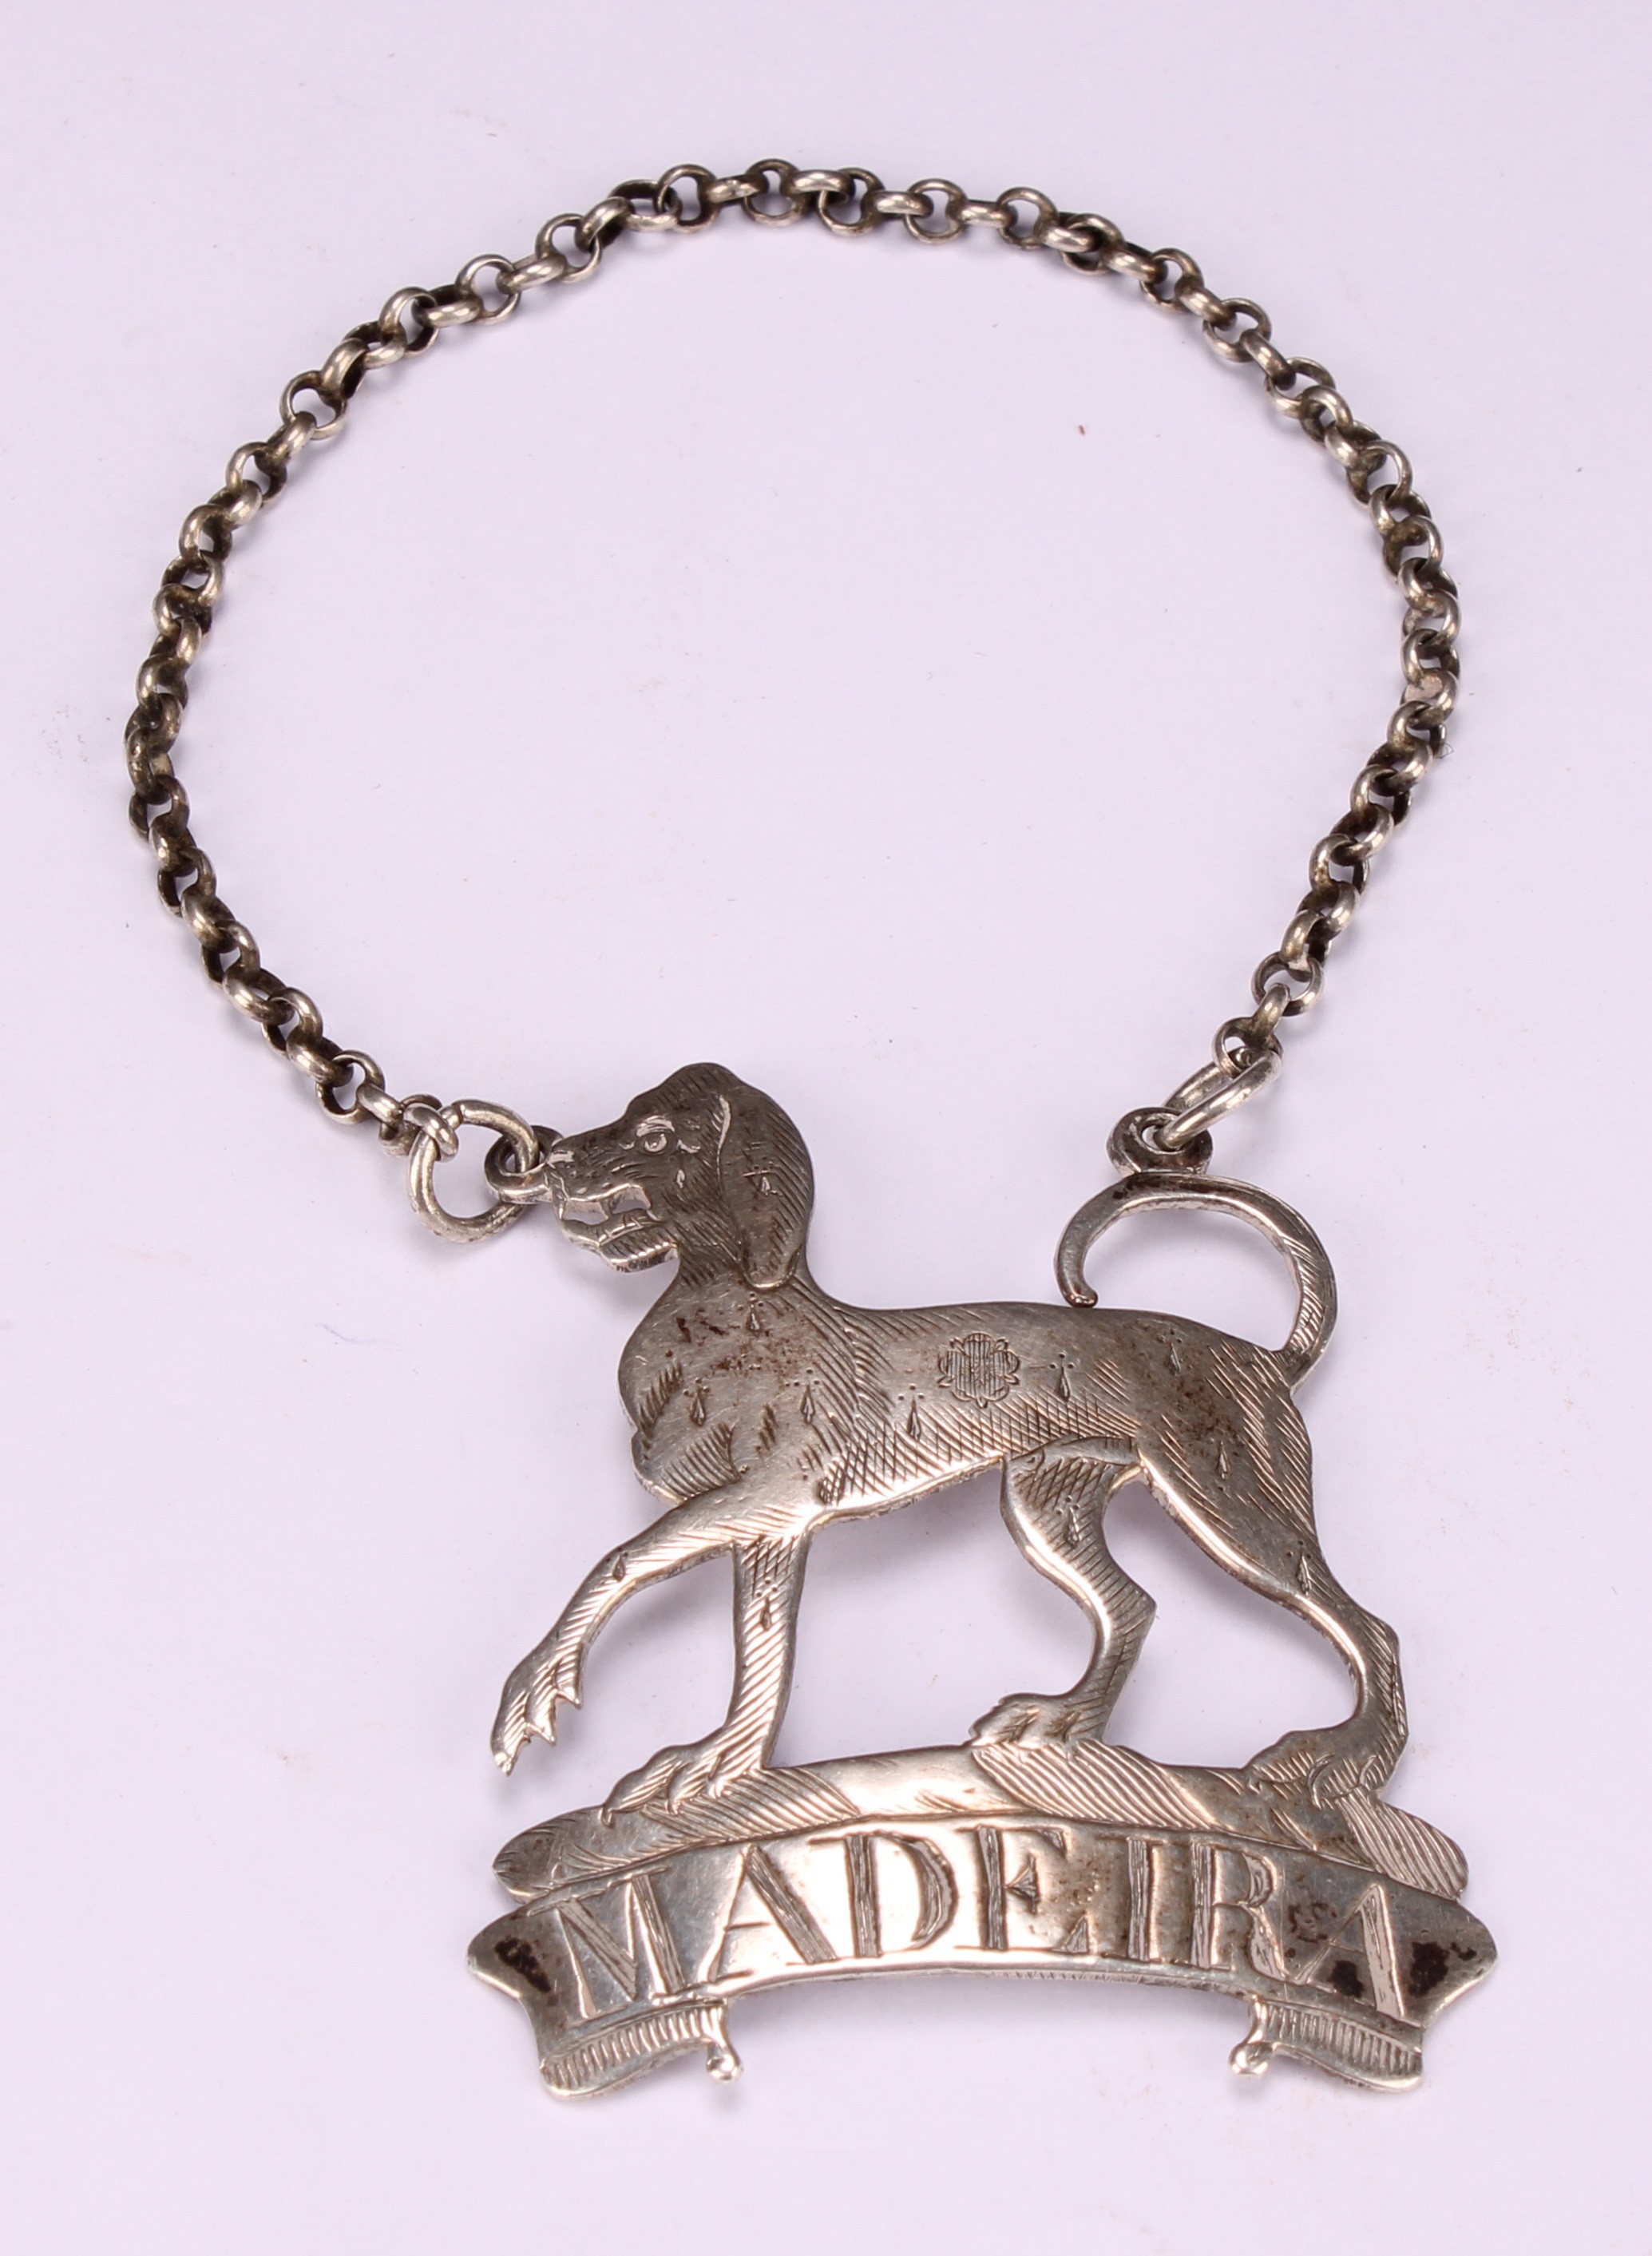 A George III silver wine label, Madeira, crested by a Talbot dog, 4.5cm wide, Richard Binley, - Image 2 of 3